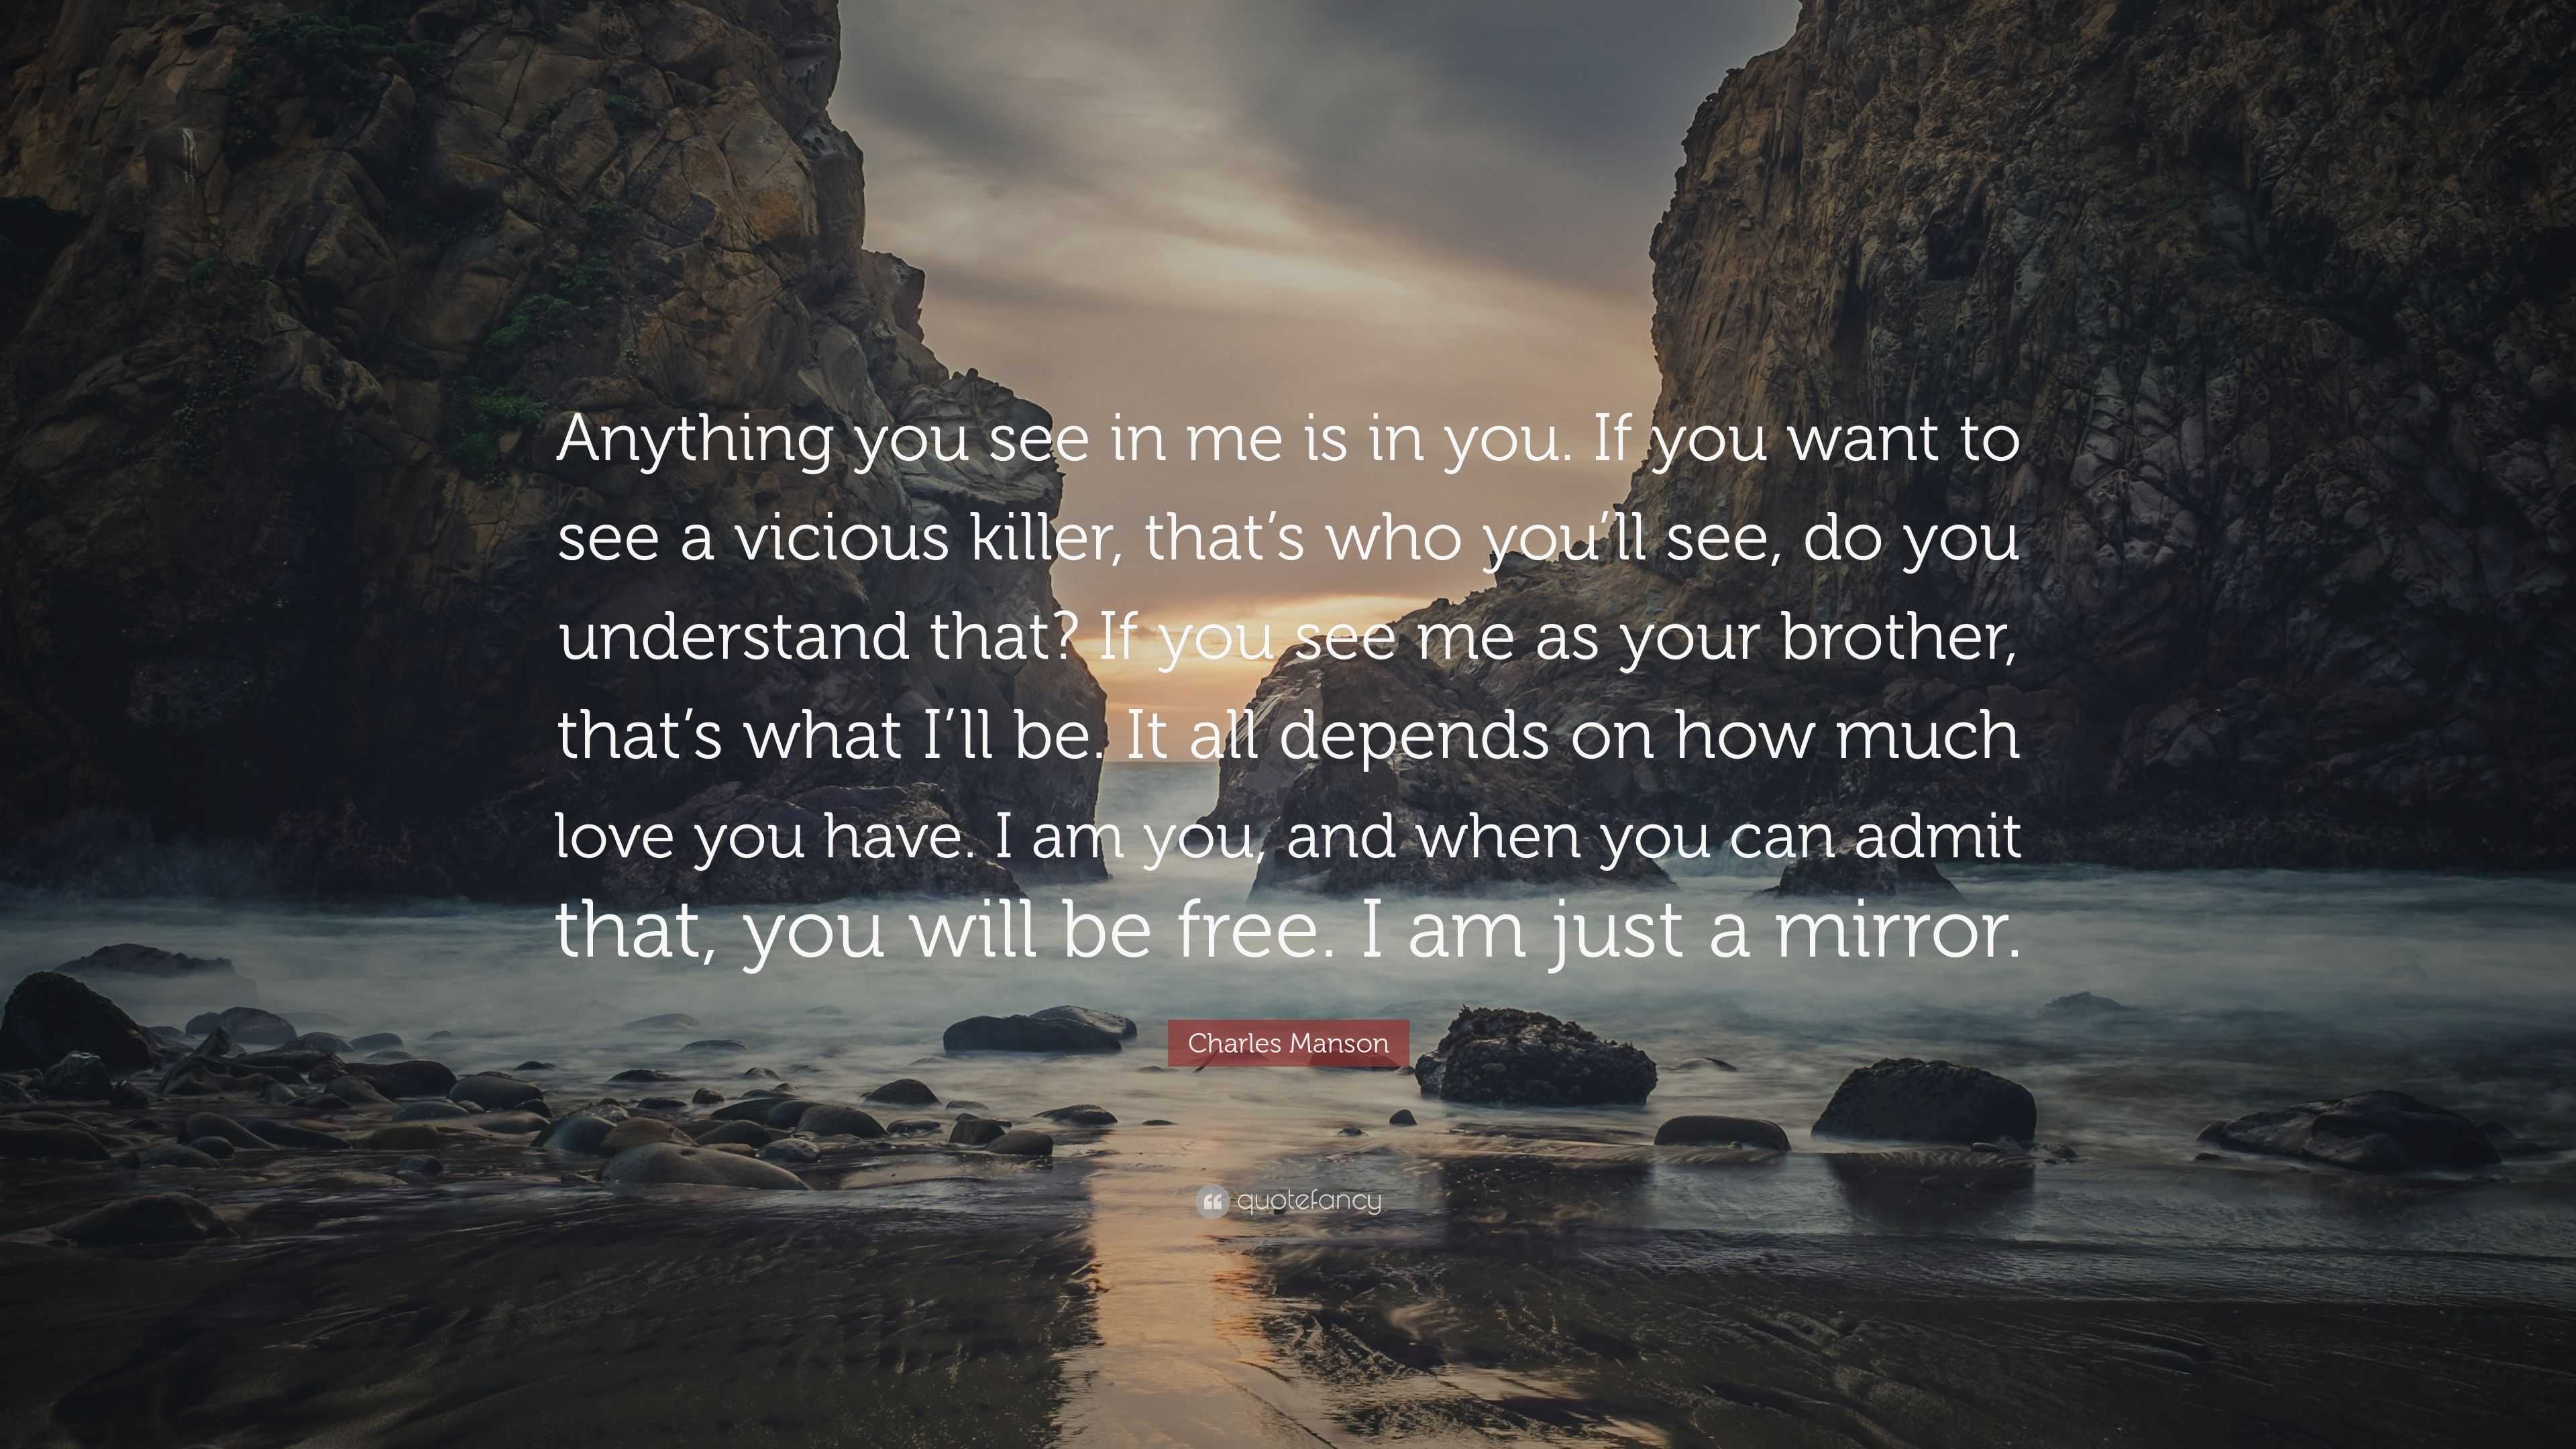 Charles Manson Quote: “Anything you see in me is in you. If you want to ...